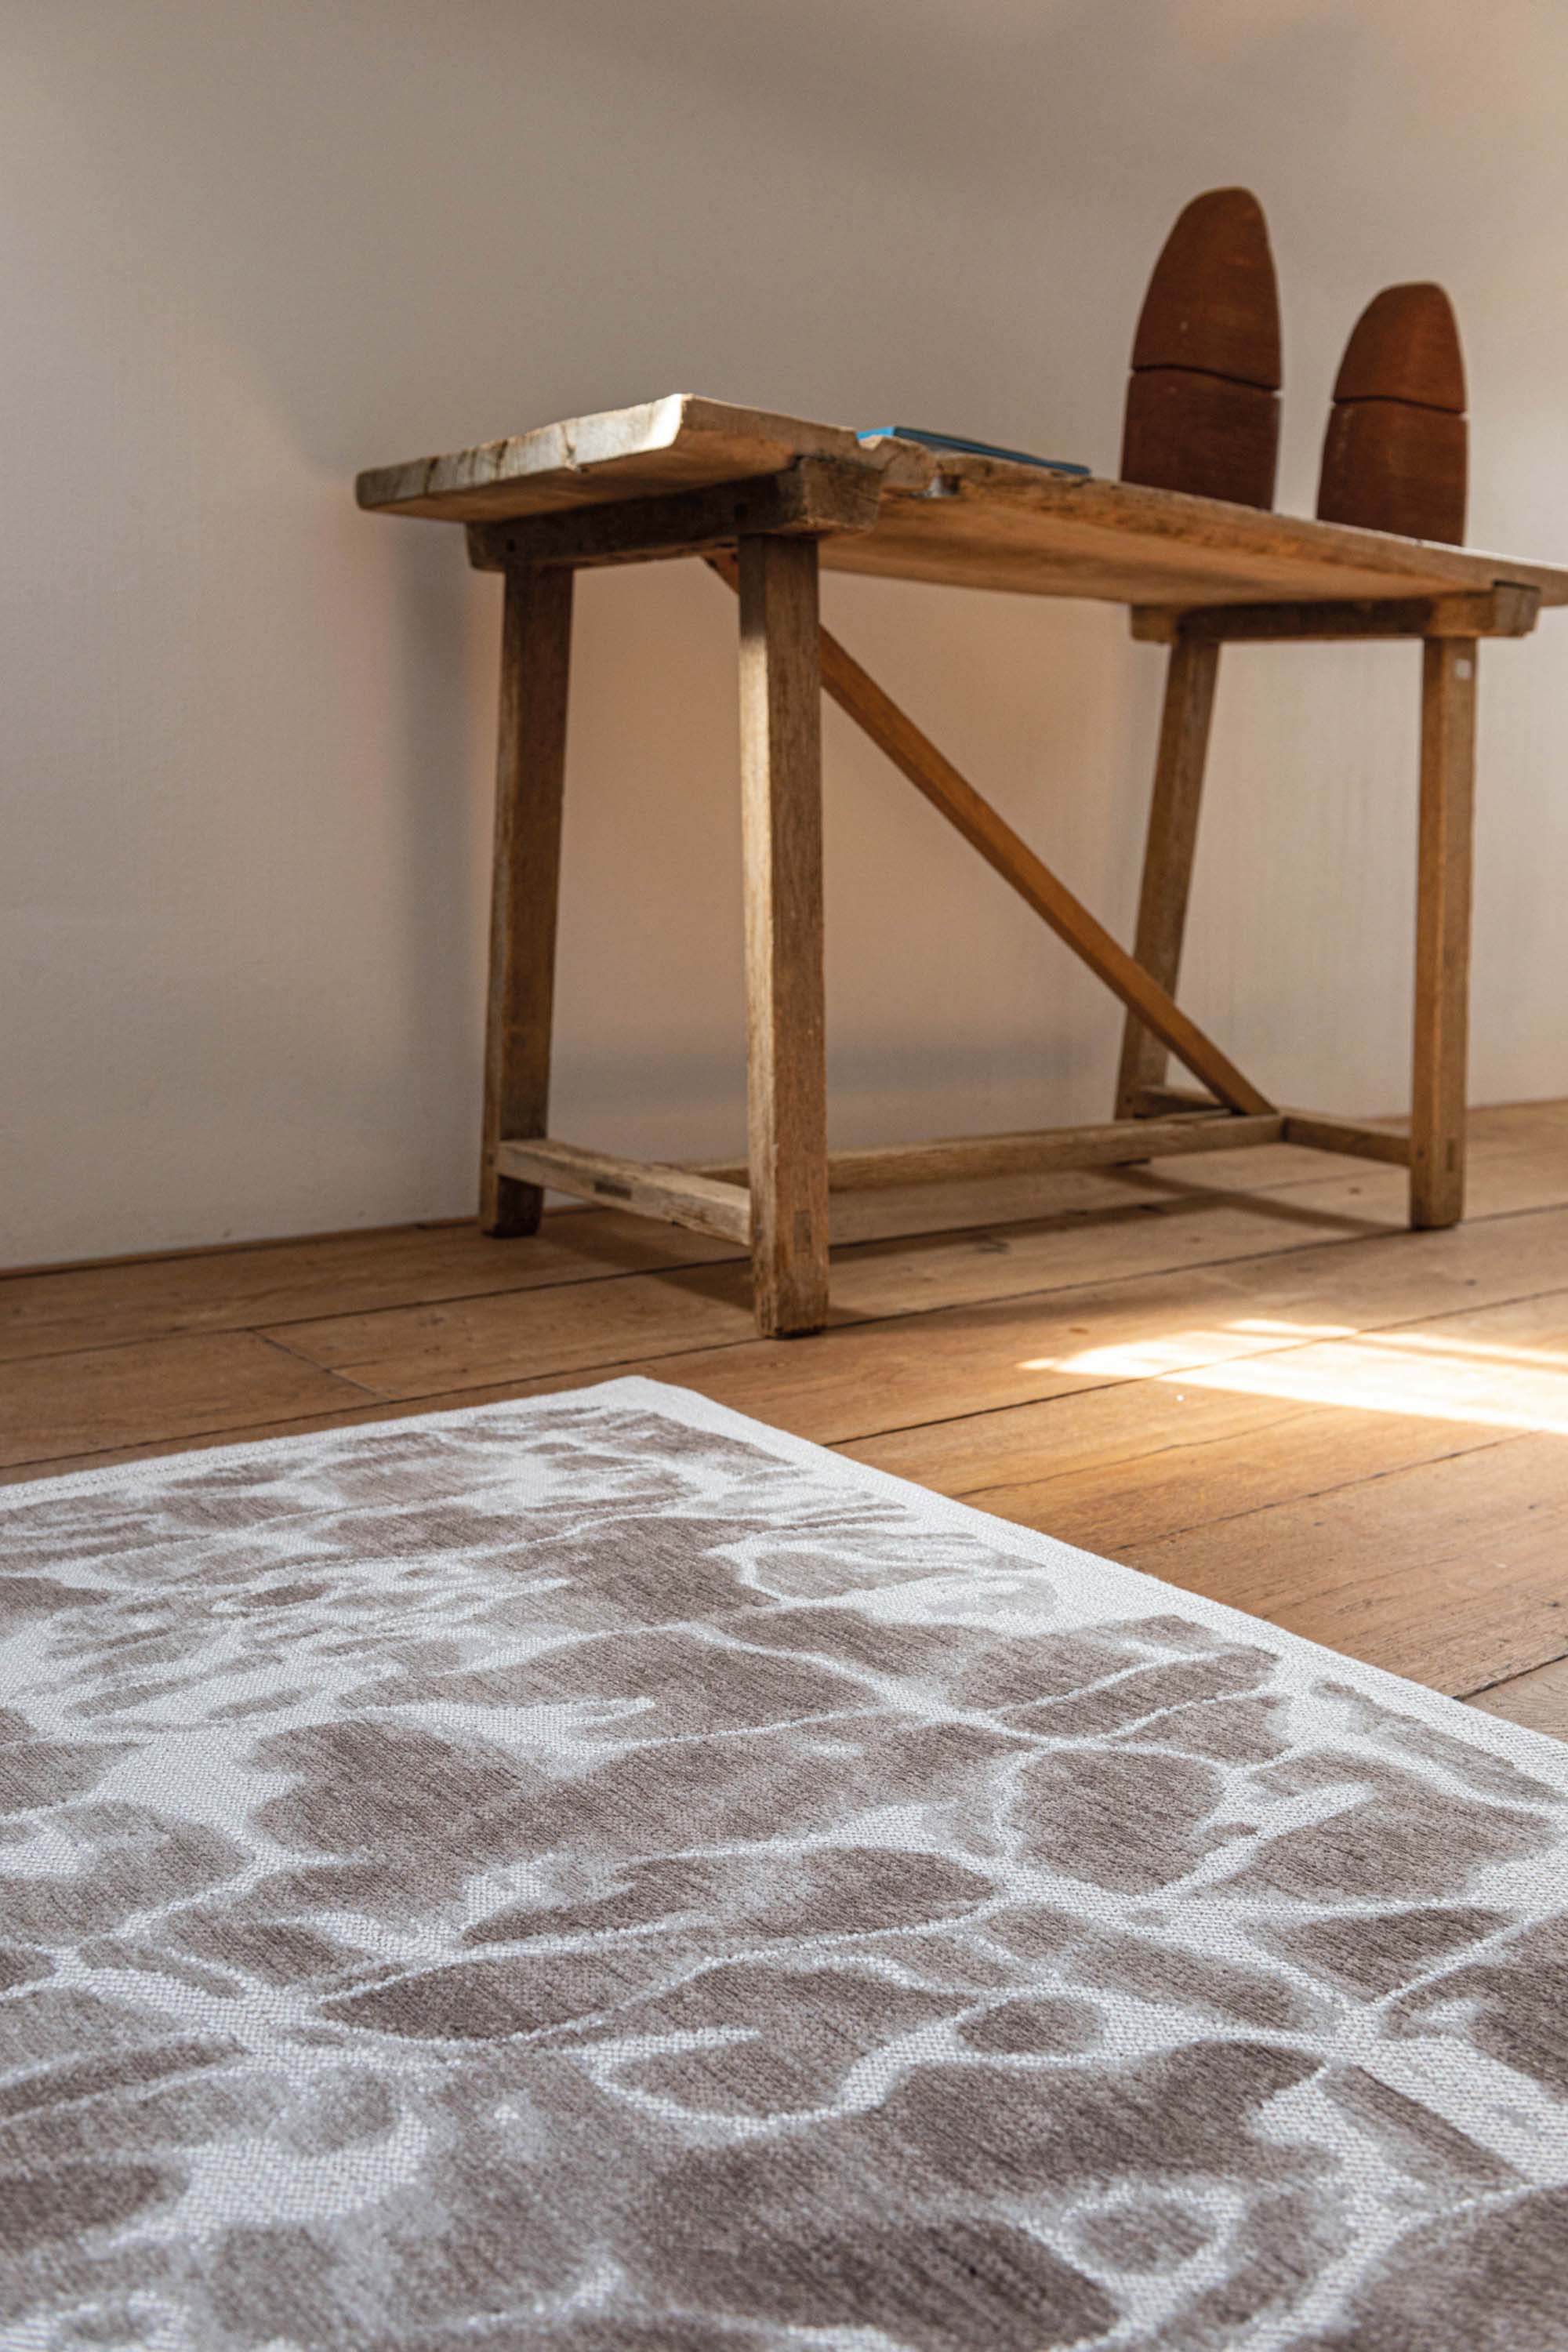 Modern runner rug with silver abstract water inspired pattern